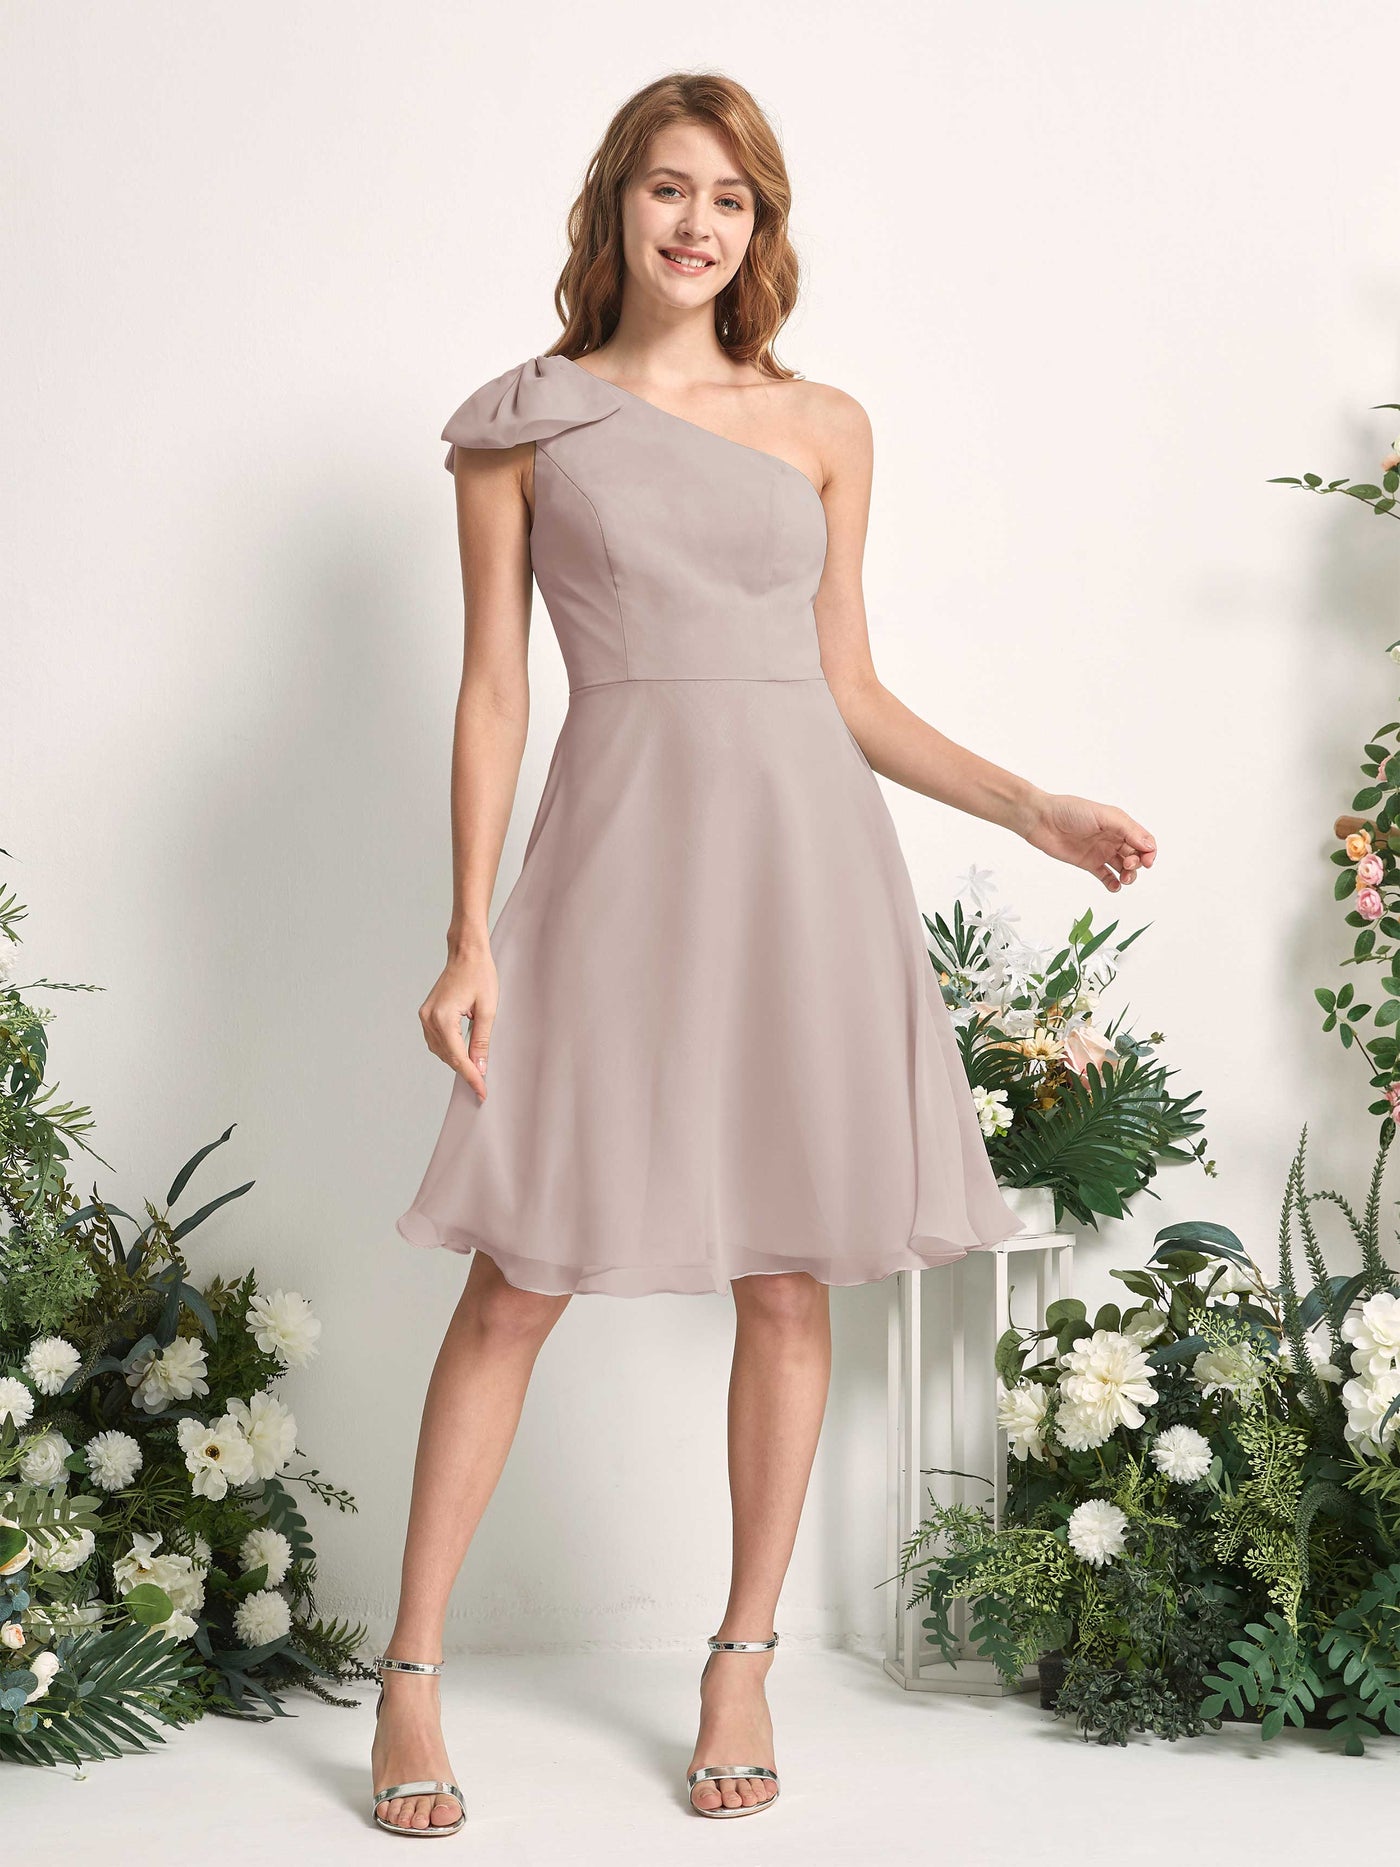 Bridesmaid Dress A-line Chiffon One Shoulder Knee Length Sleeveless Wedding Party Dress - Taupe (81227024)#color_taupe